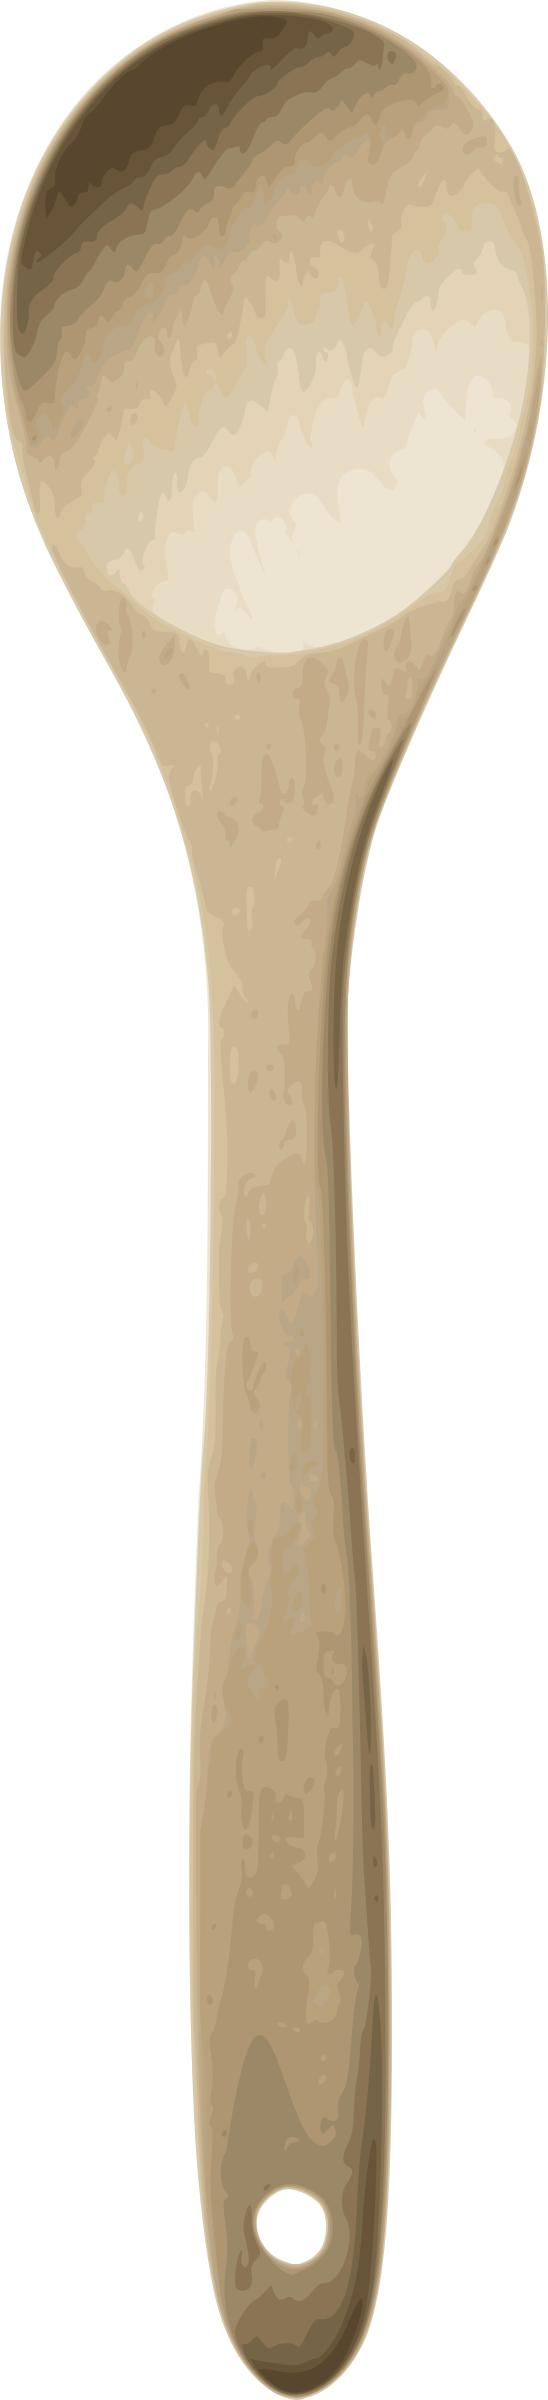 Cooking spoon png